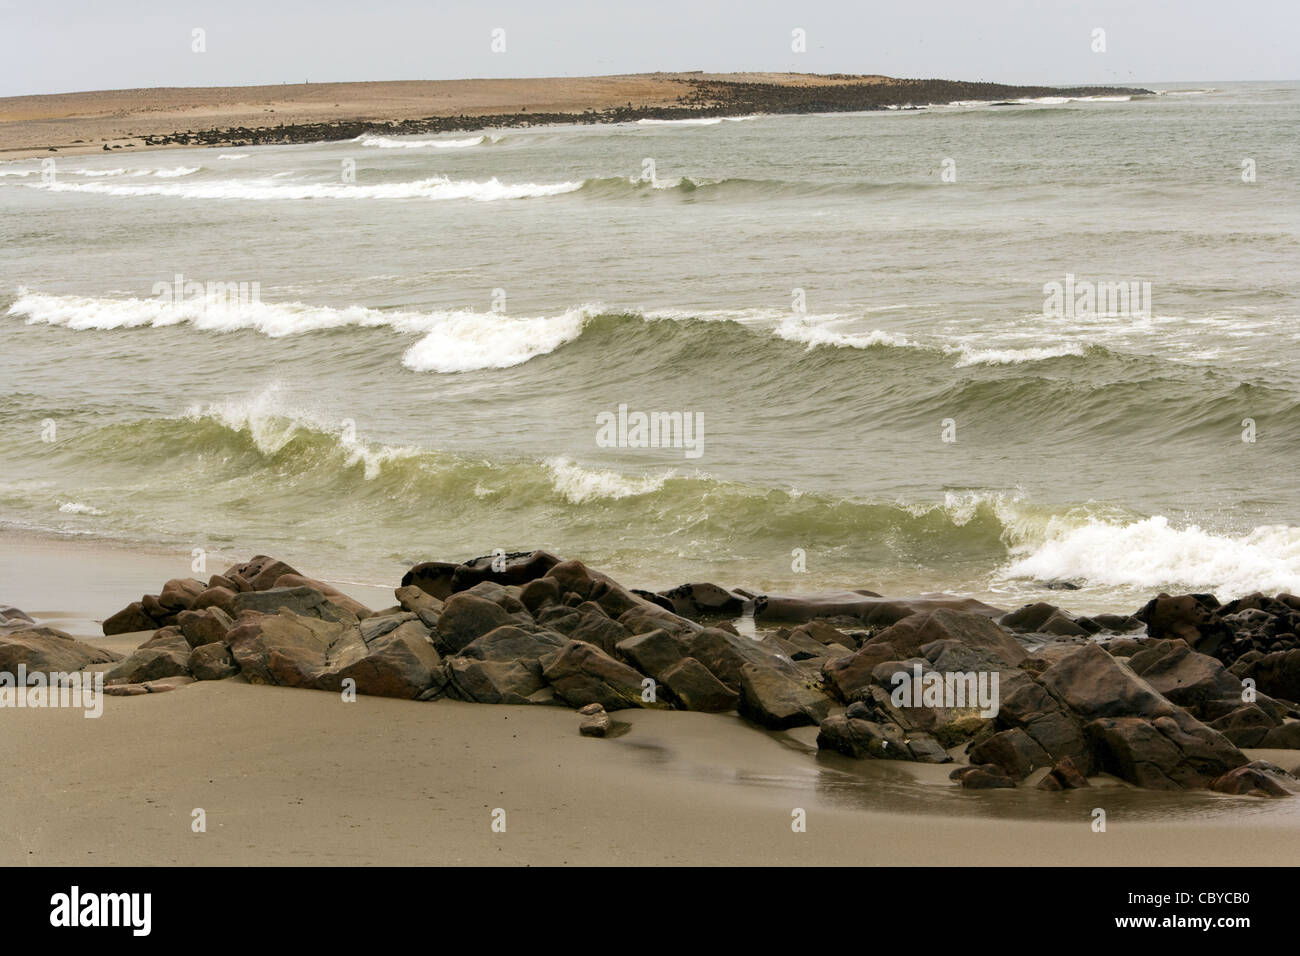 Cape Cross Seal Reserve - near Henties Bay, Namibia, Africa Stock Photo